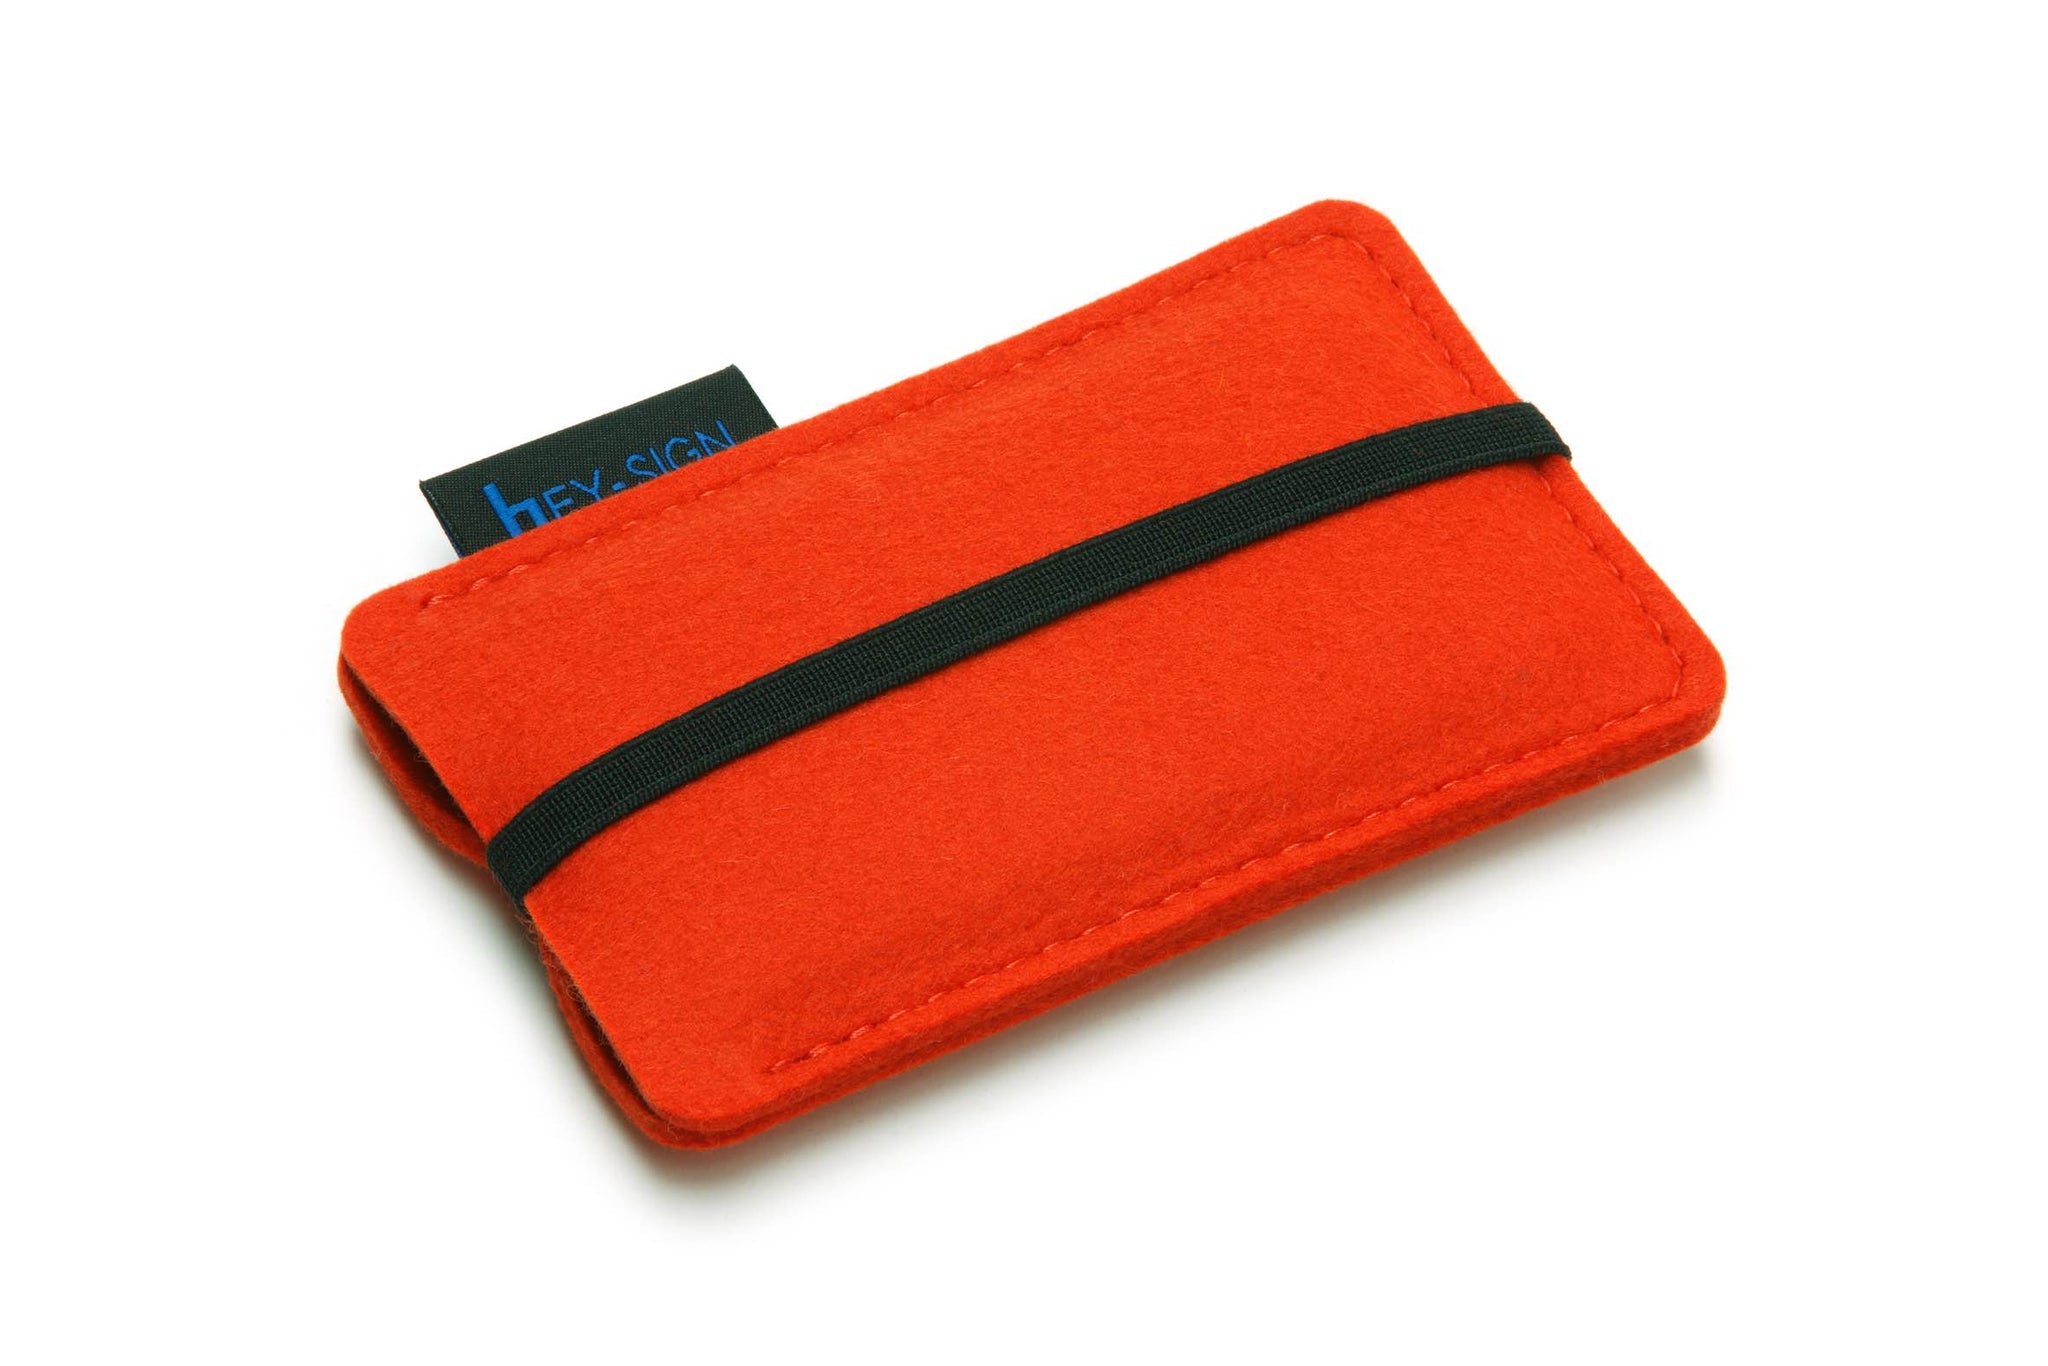 Felt Smartphone Sleeve or Pouch in Mango by Hey-Sign 301031420